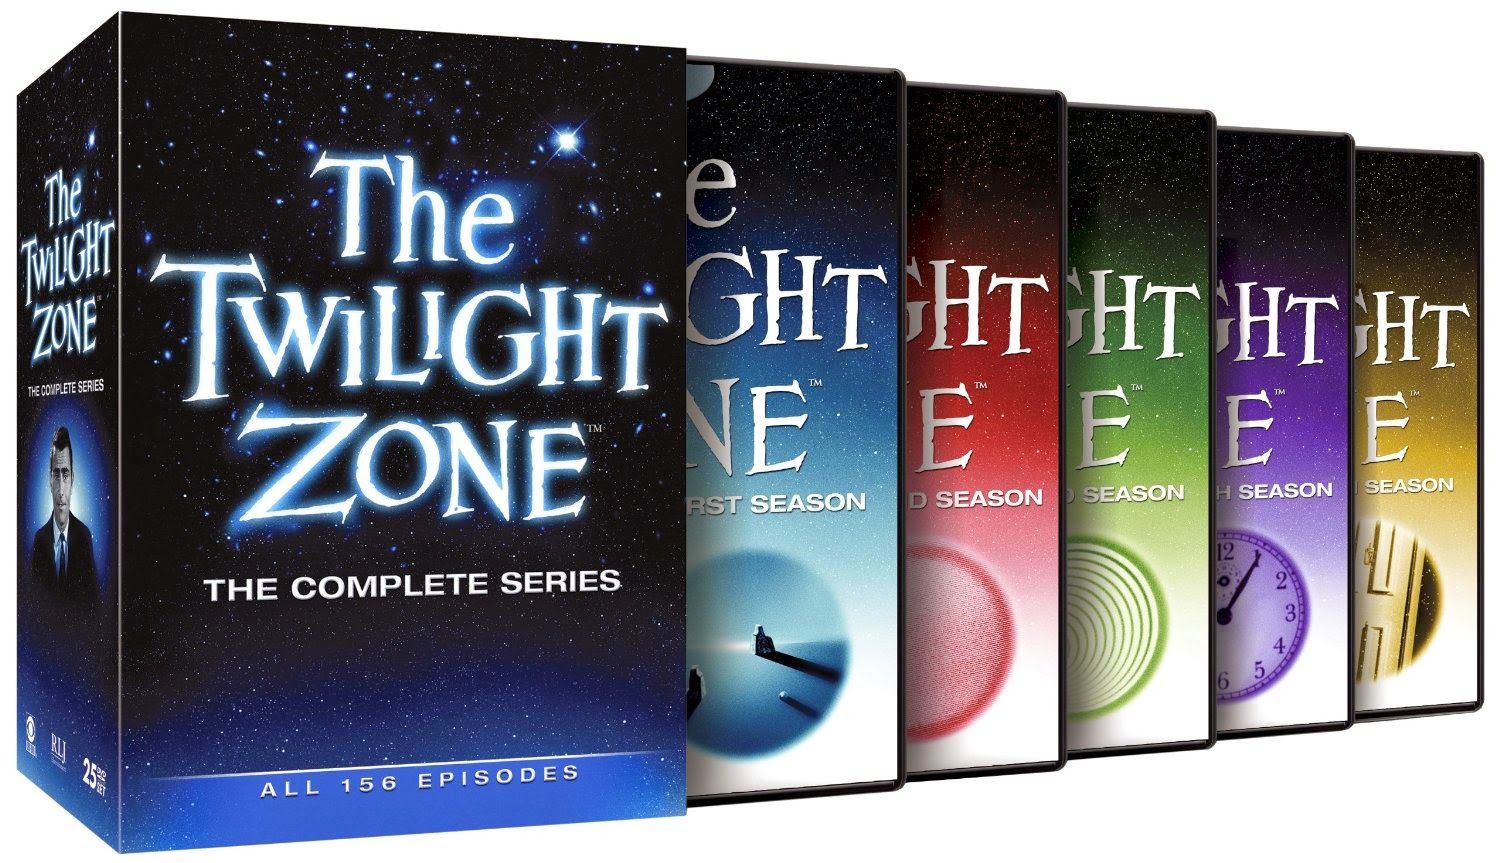 The Twilight Zone The Complete Series